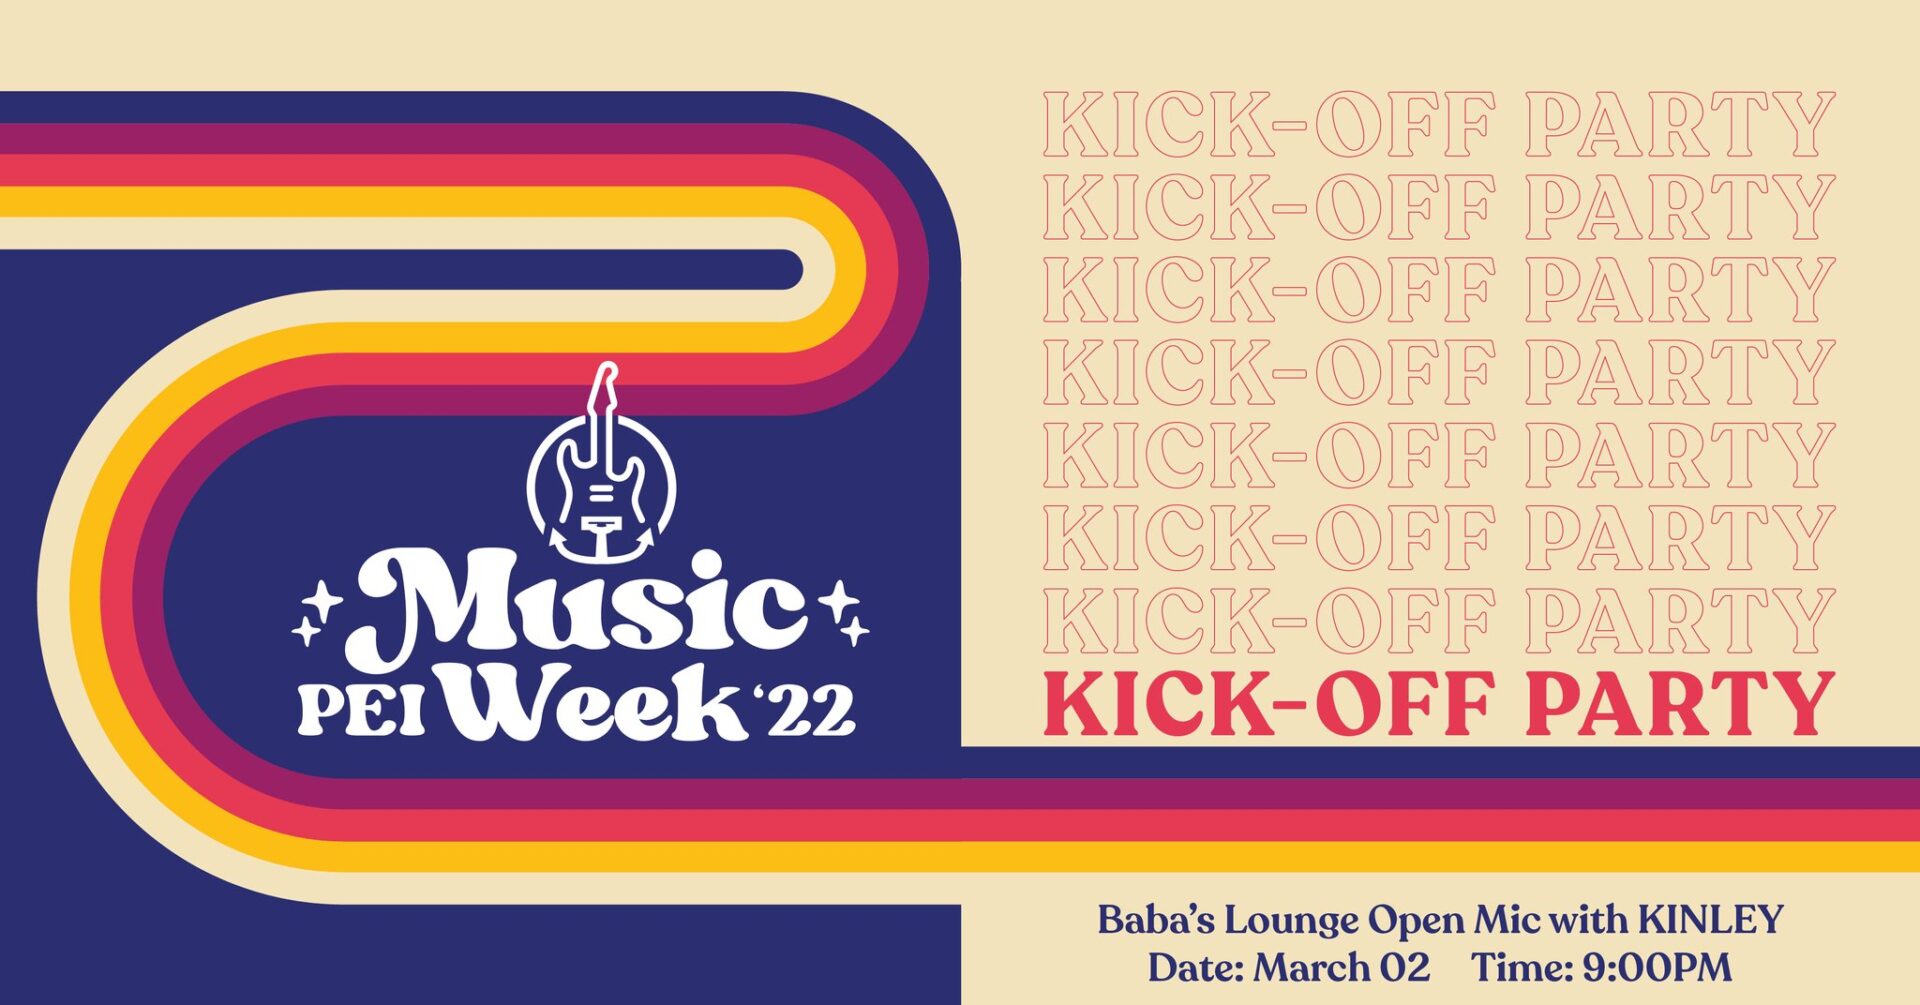 Kick-off Party Open Mic